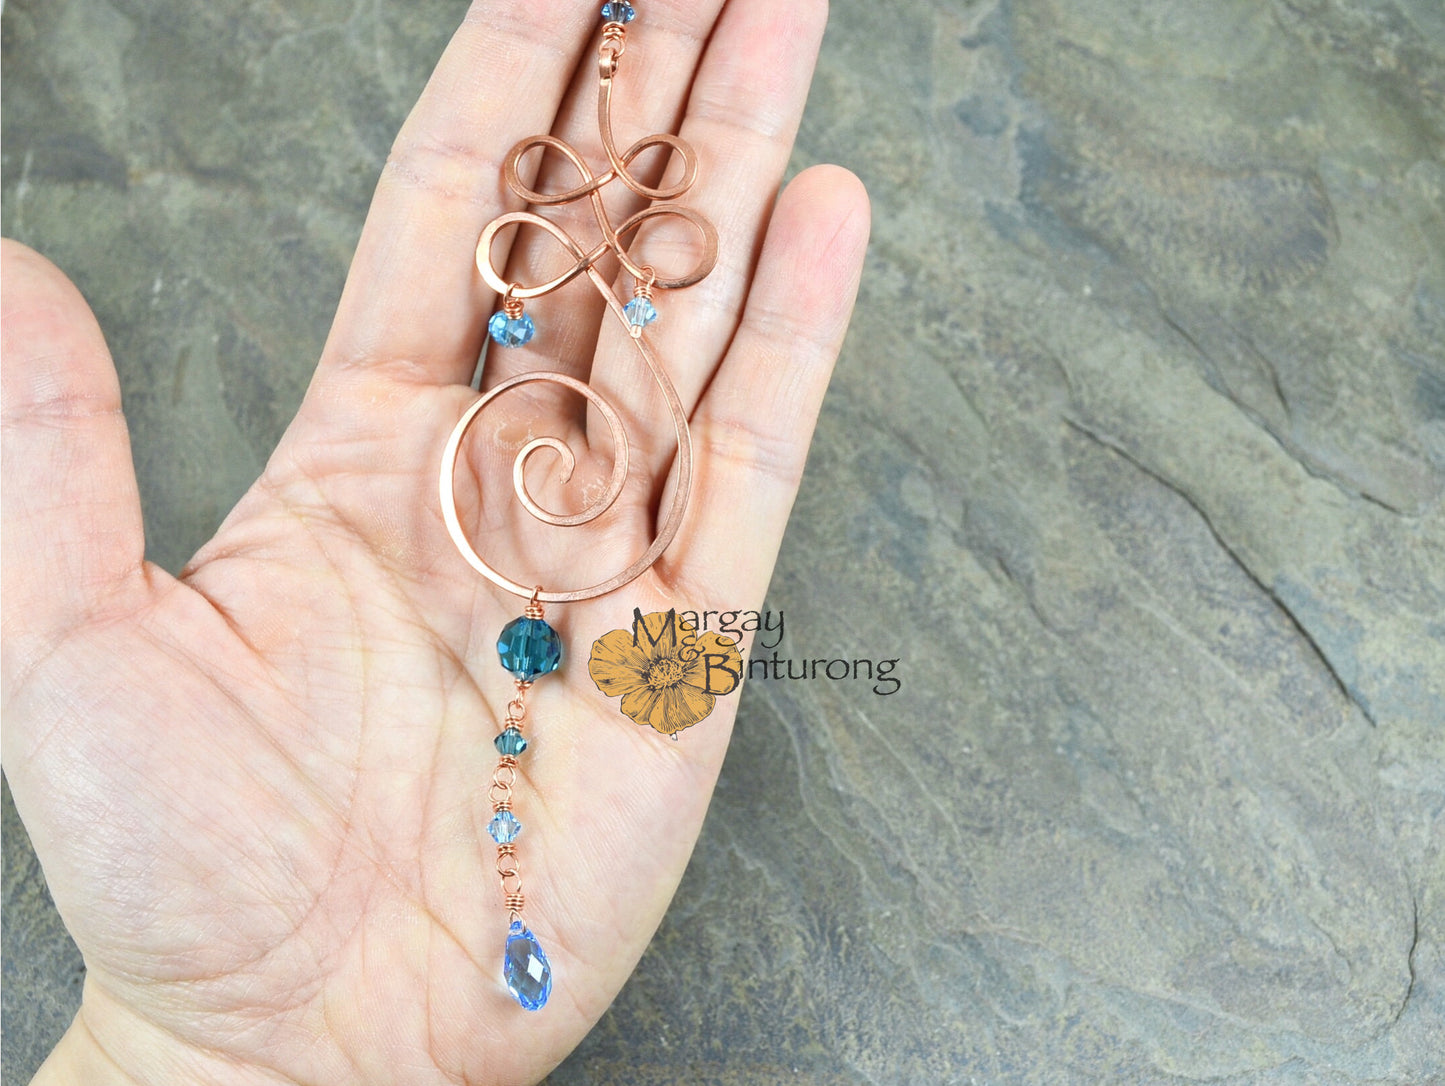 “Tranquility” Unalome ~ Mini Suncatcher Made with Crystal prism beads